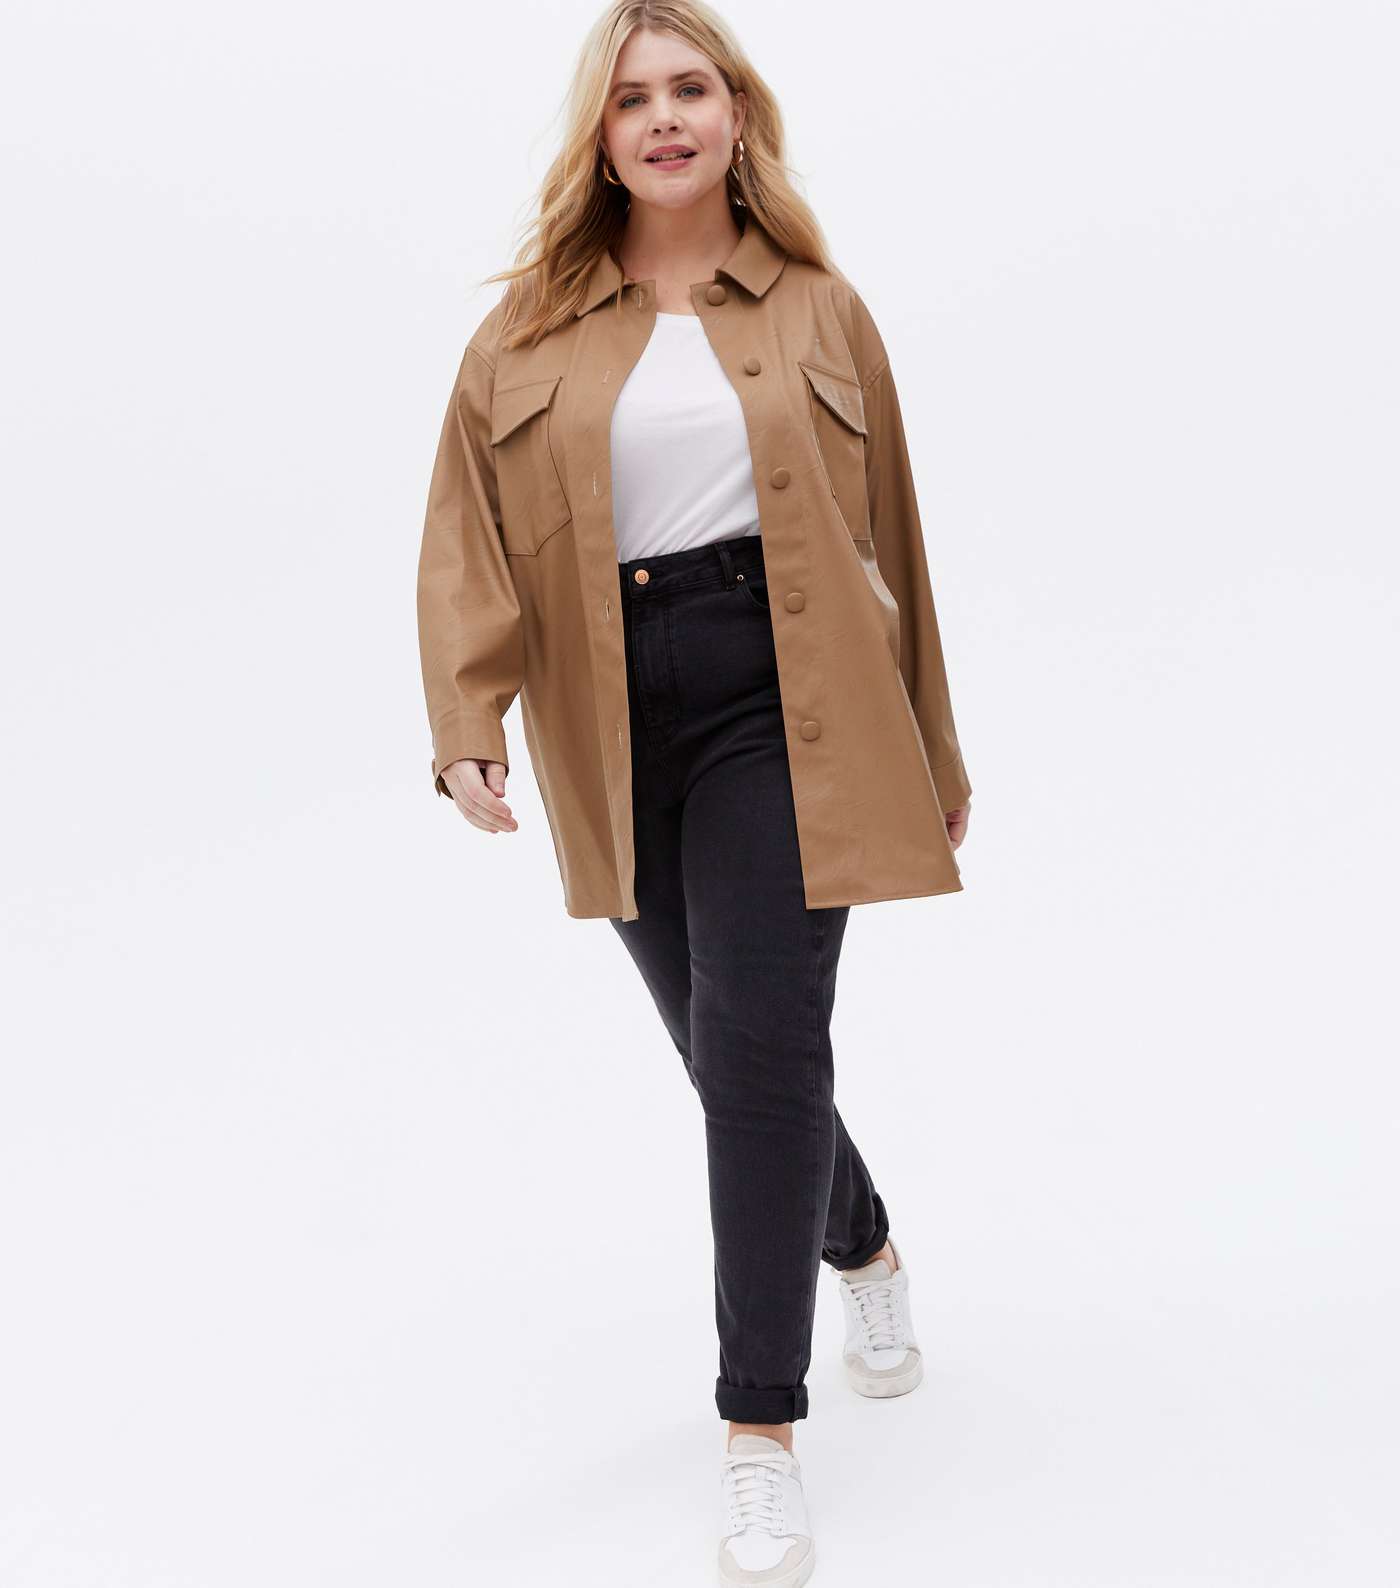 Curves Camel Leather-Look Double Pocket Shacket Image 2